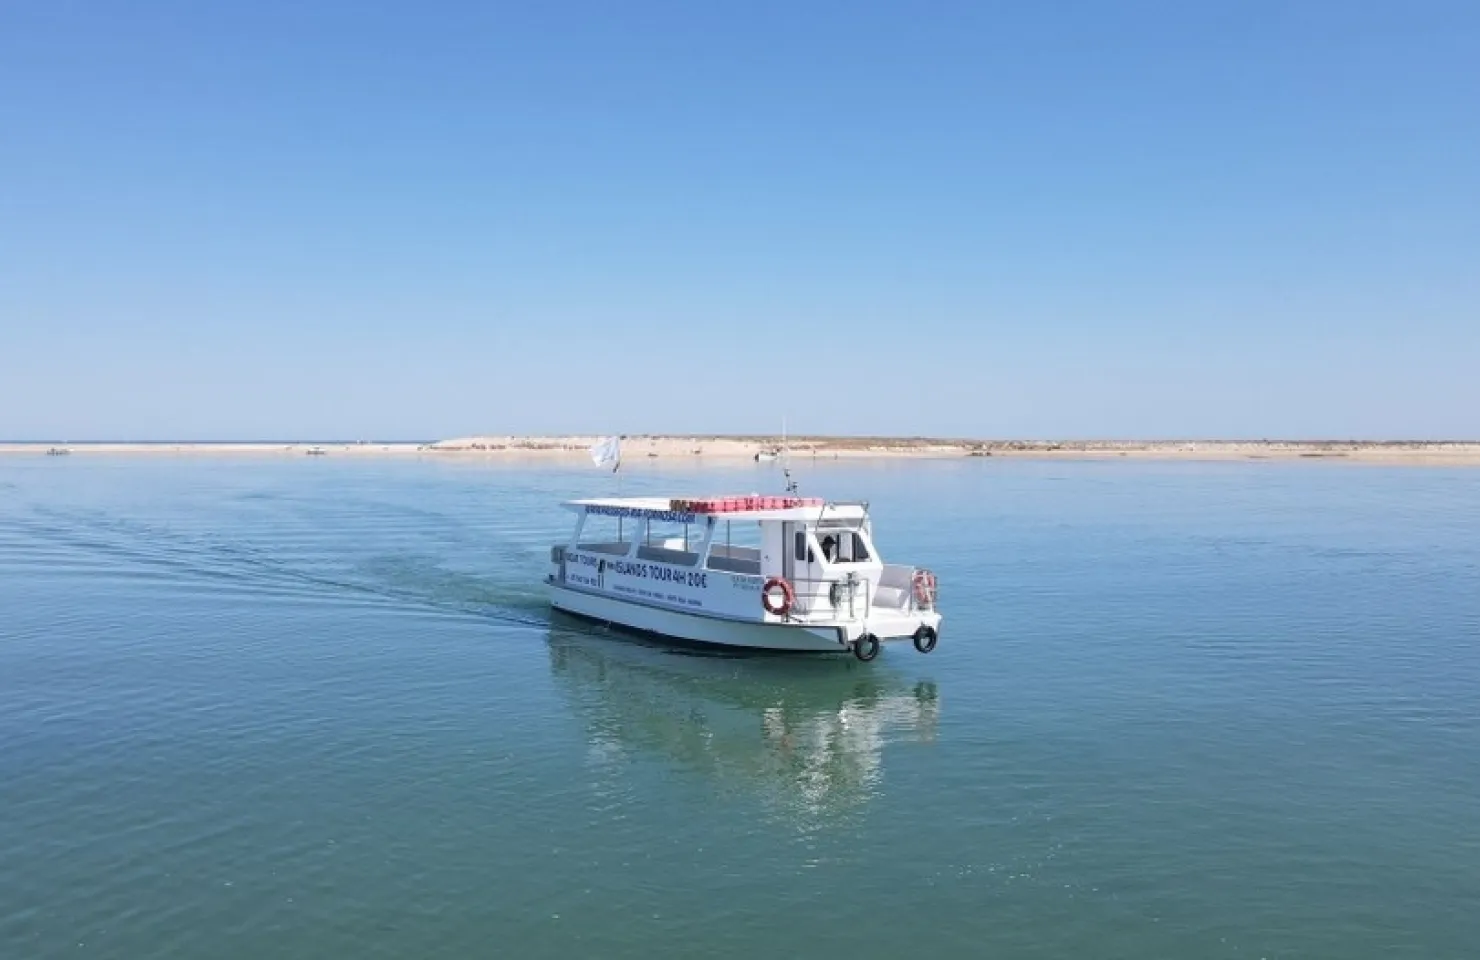 Ria Formosa Islands Boat Tour - Activities and Things to Do in Ria Formosa Natural Park